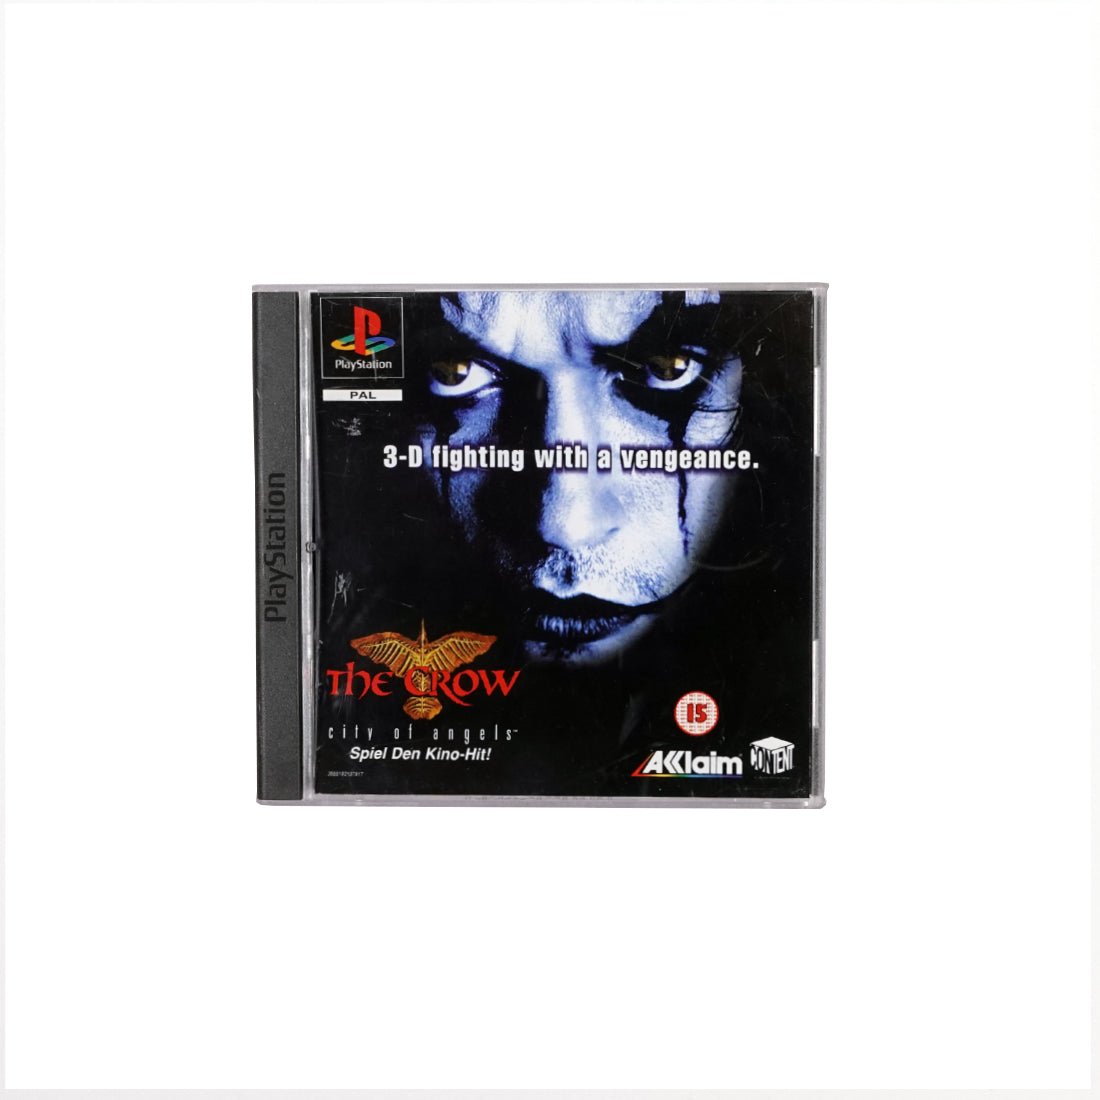 (Pre-Owned) 3D Fighting with a vengeance - PlayStation 1 - Store 974 | ستور ٩٧٤